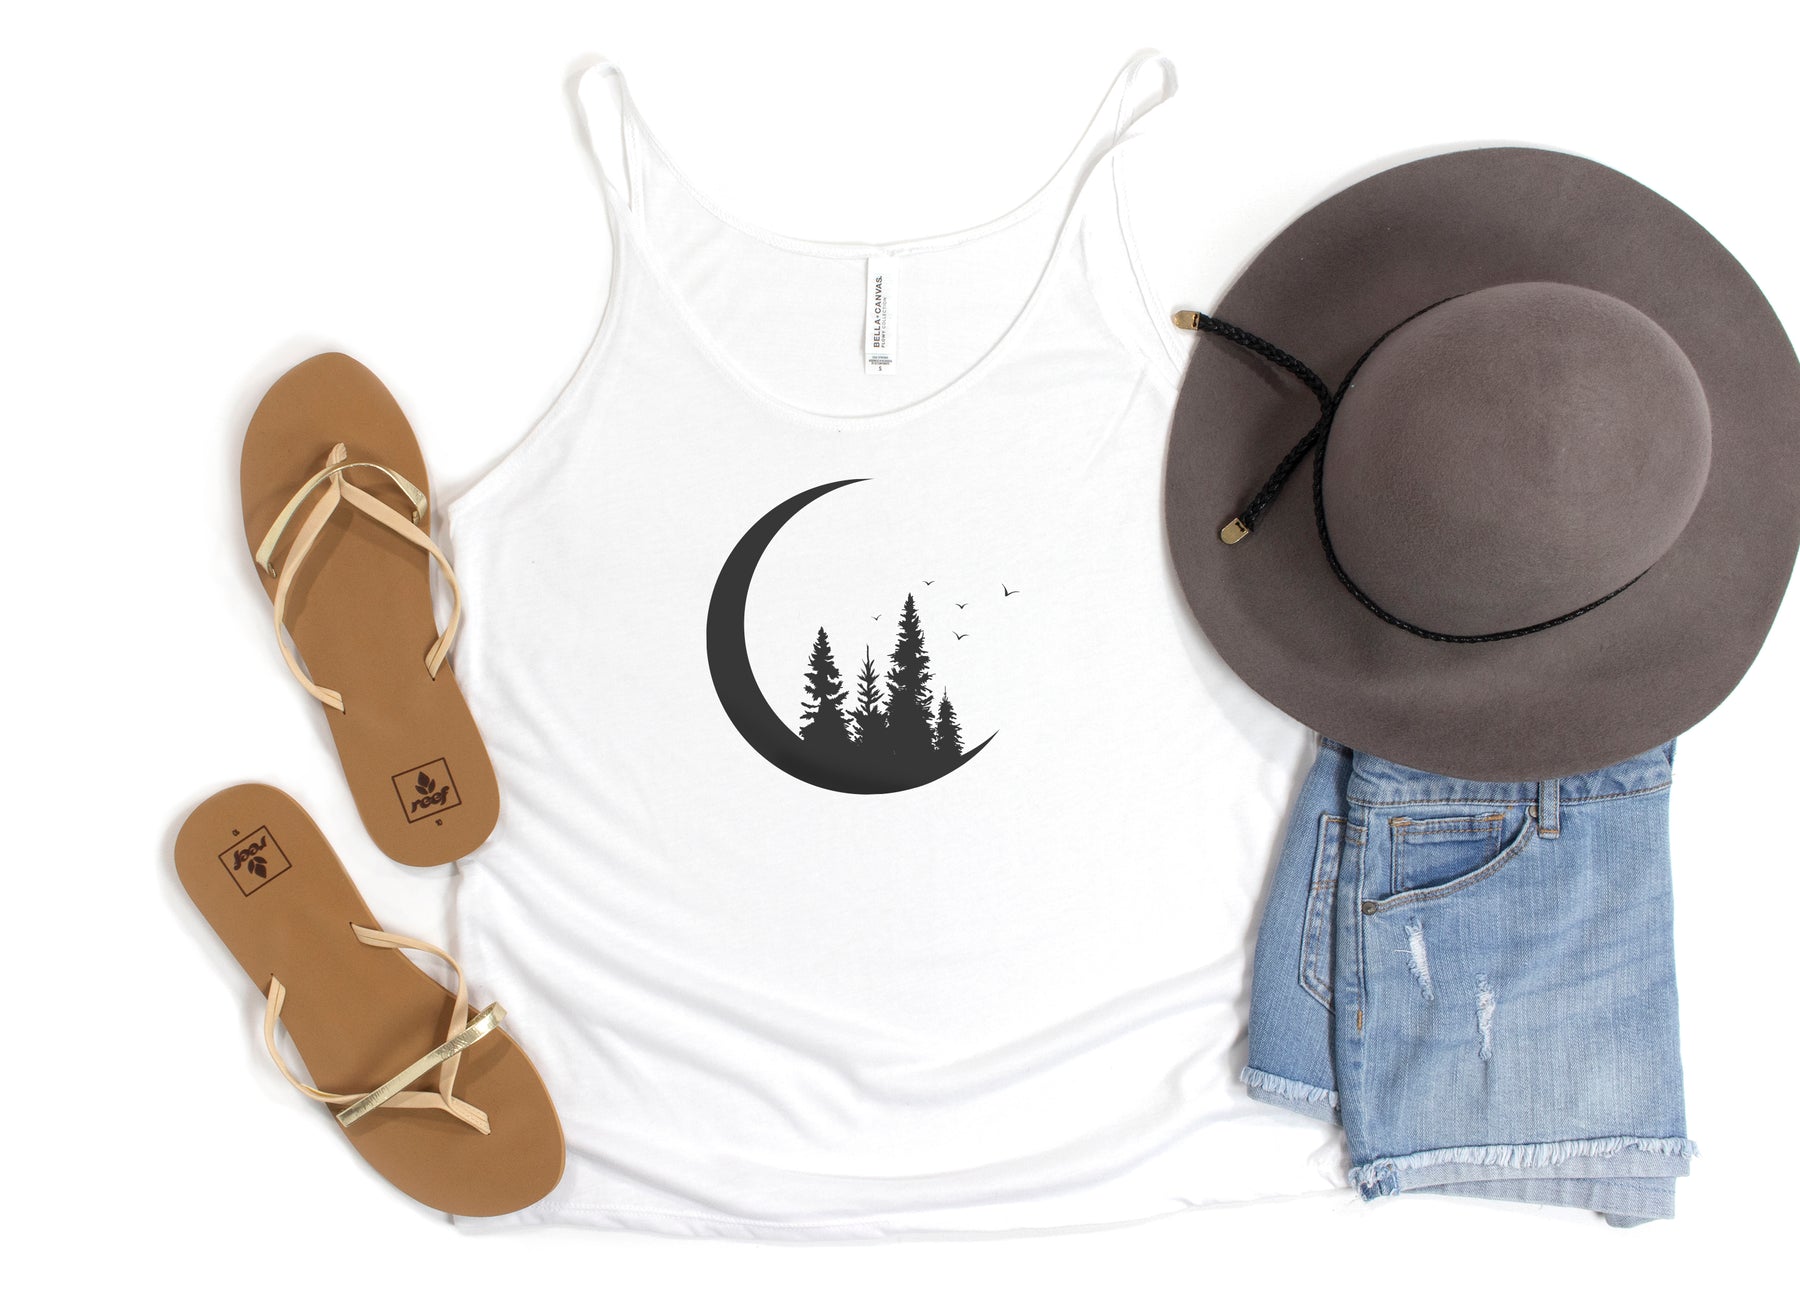 Womens Moon Tank Top for Summer - Black Crescent Moon Silhouette with Pine Trees and Birds Print on White Sleeveless Slouchy Tank